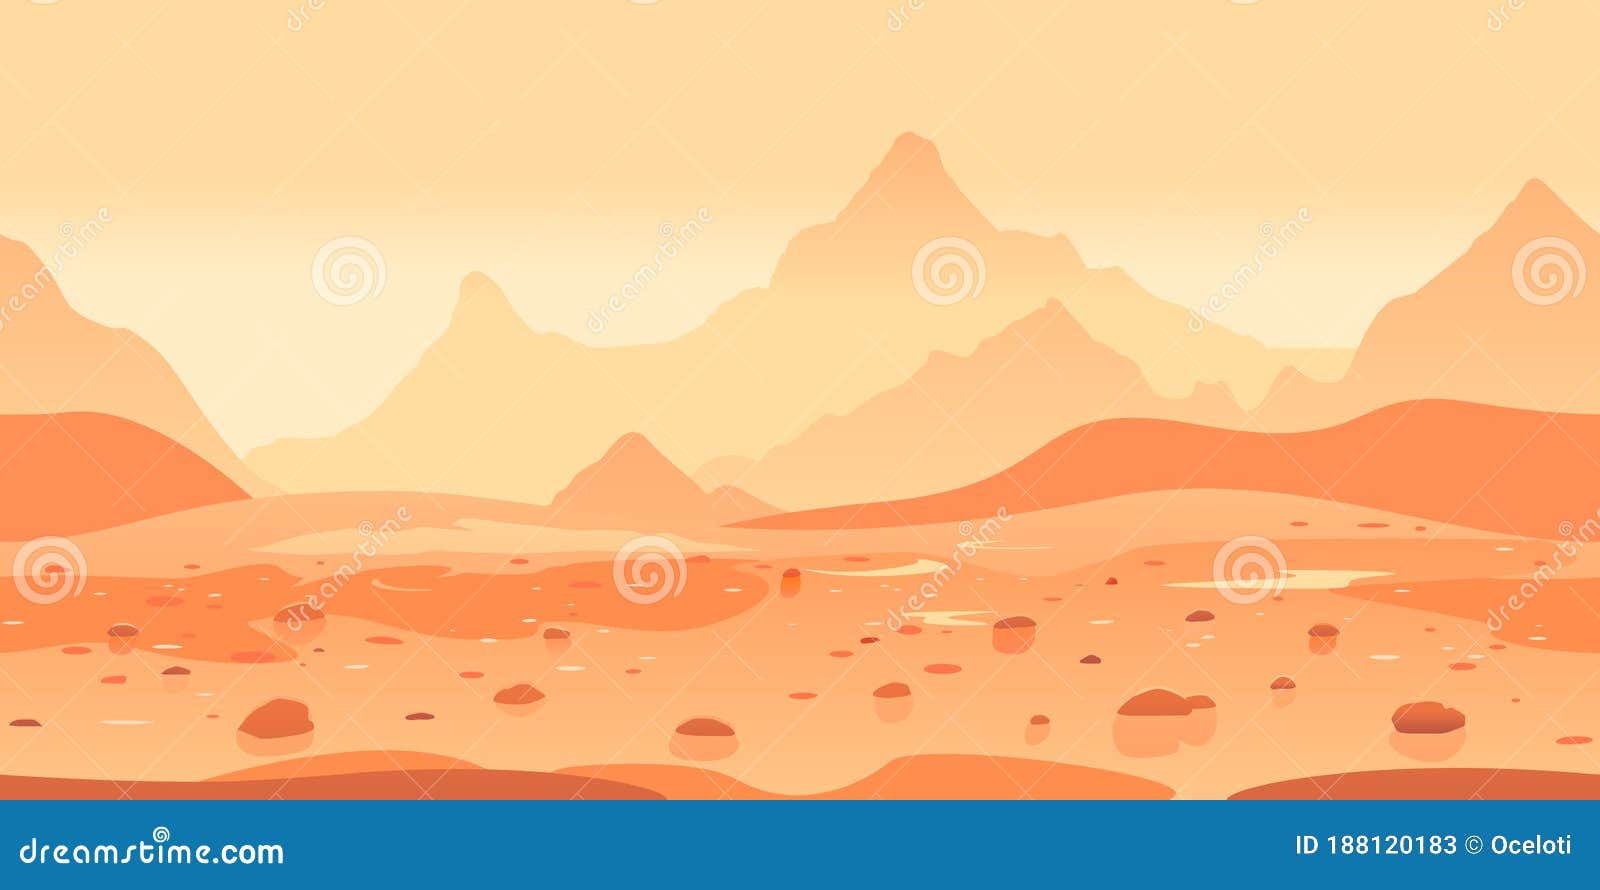 Martian Surface Background